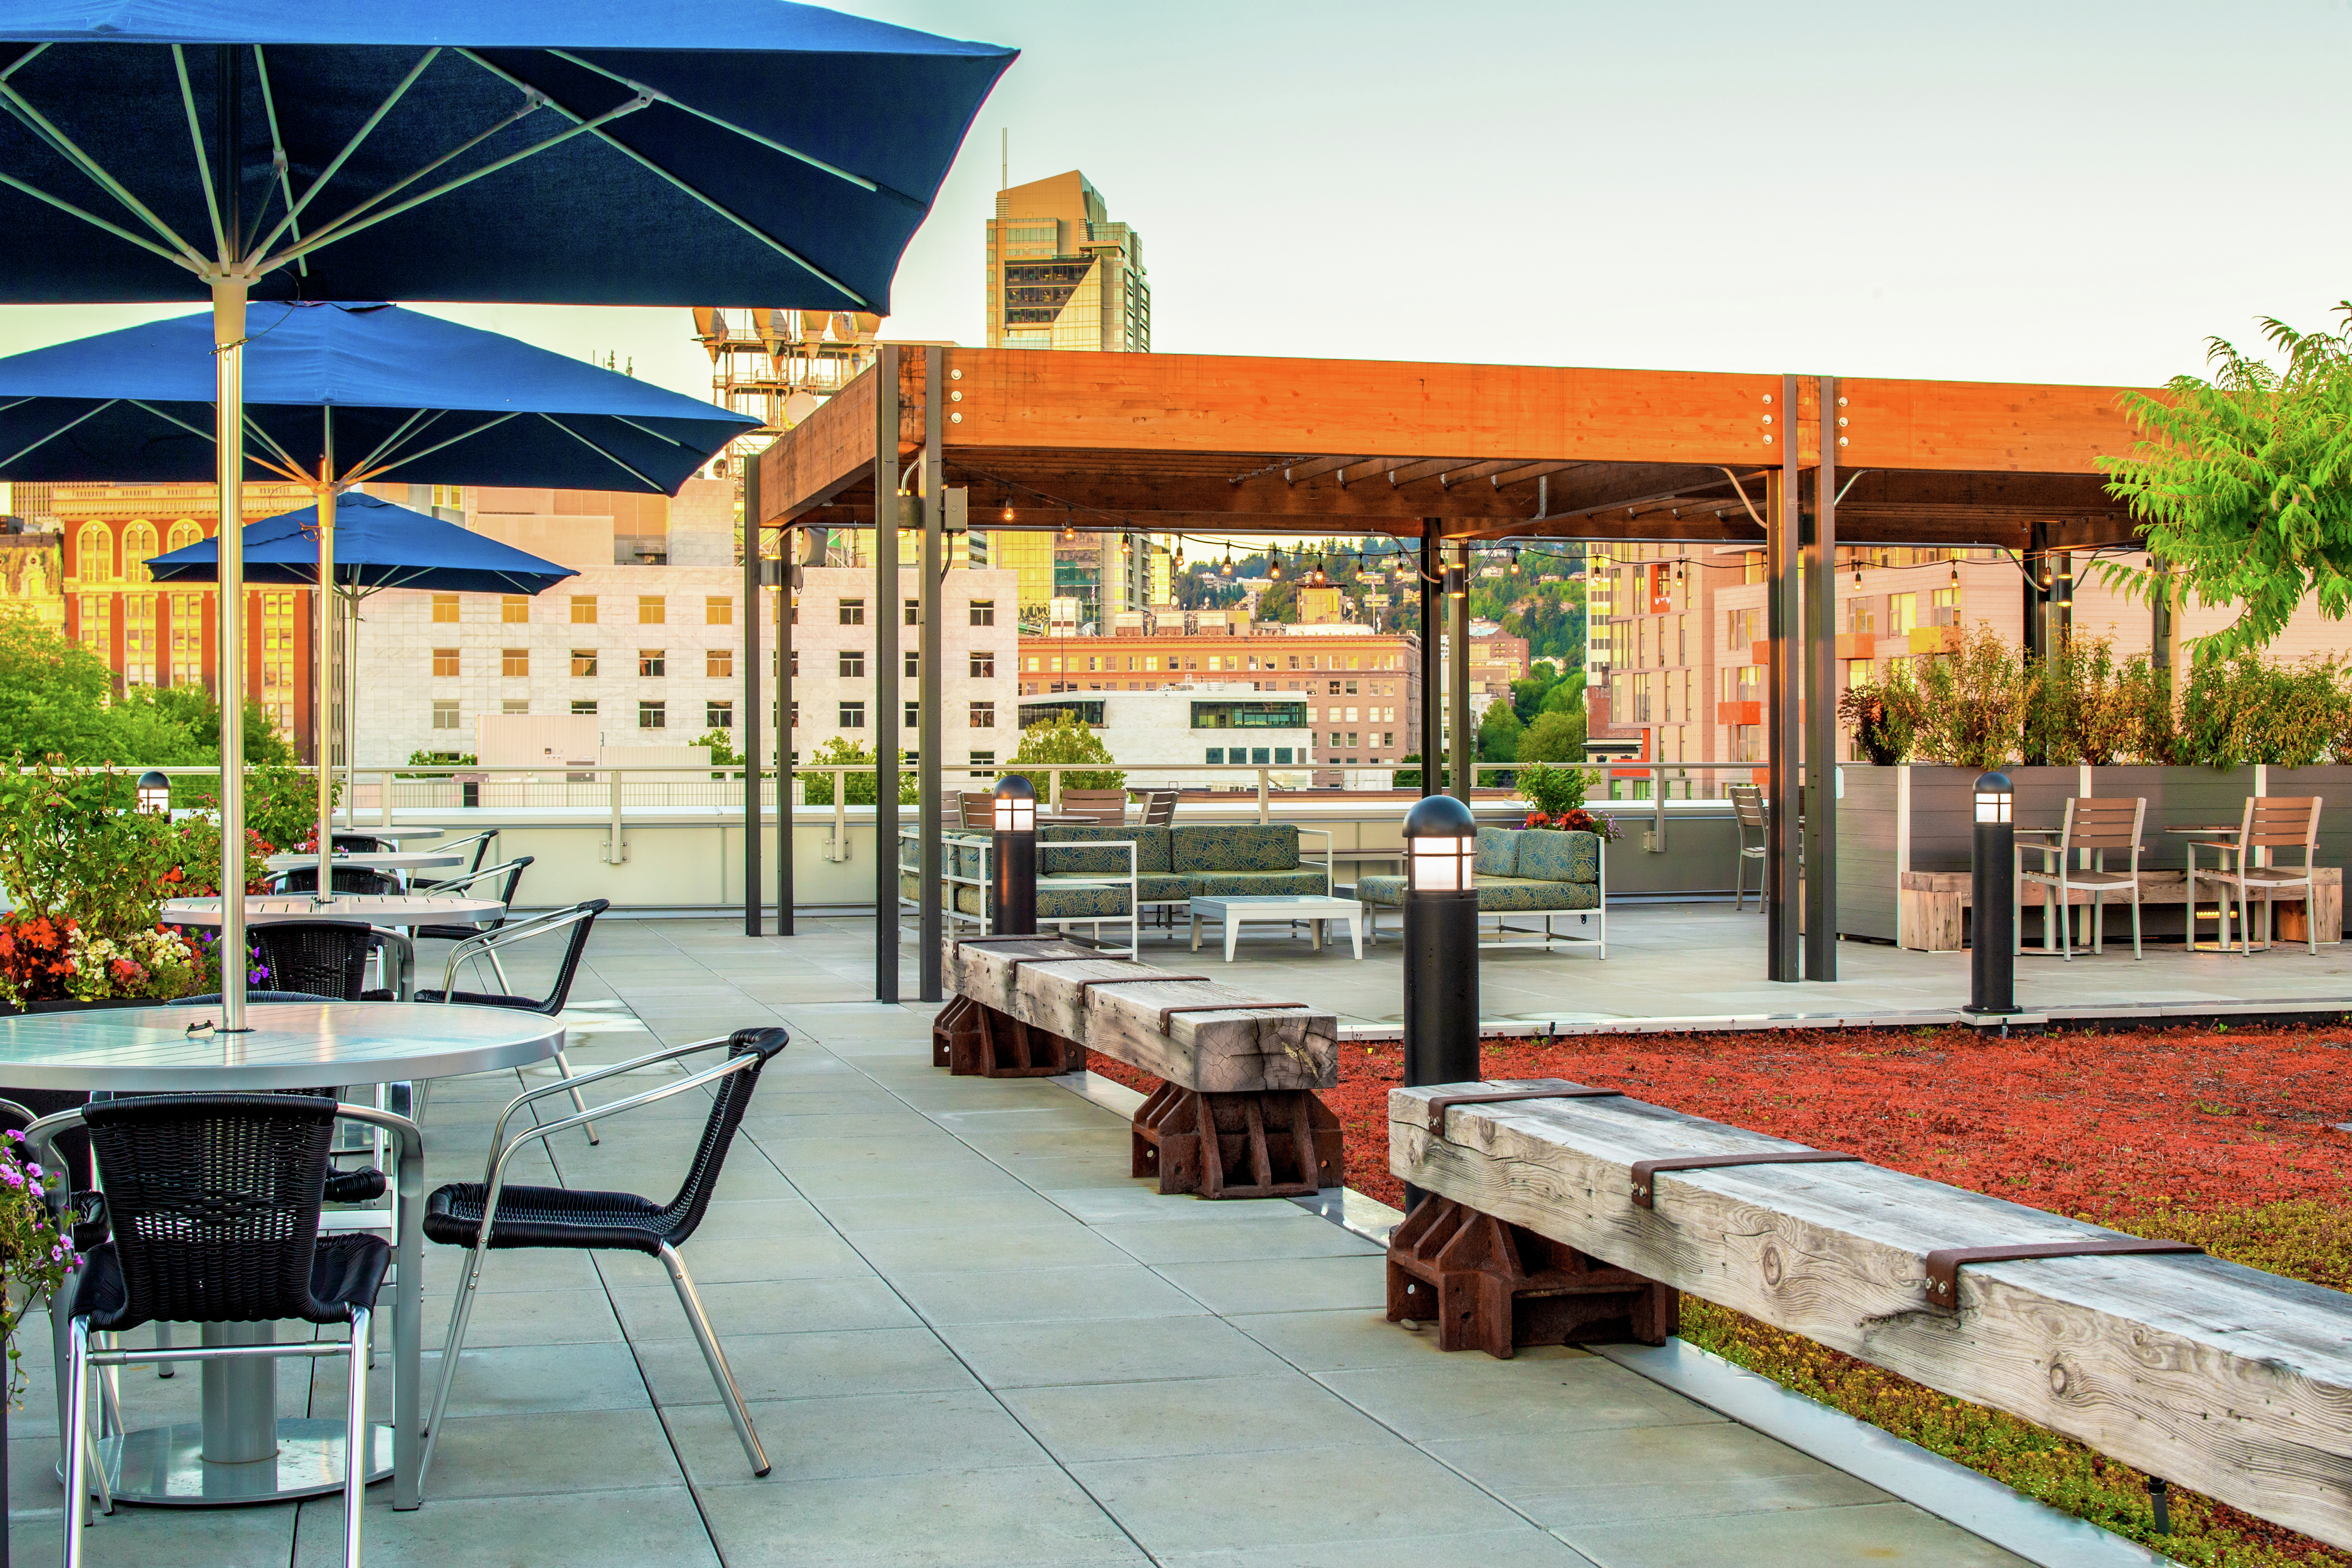 Roof Top Patio with Tables and Chairs Covered with Umbrellas